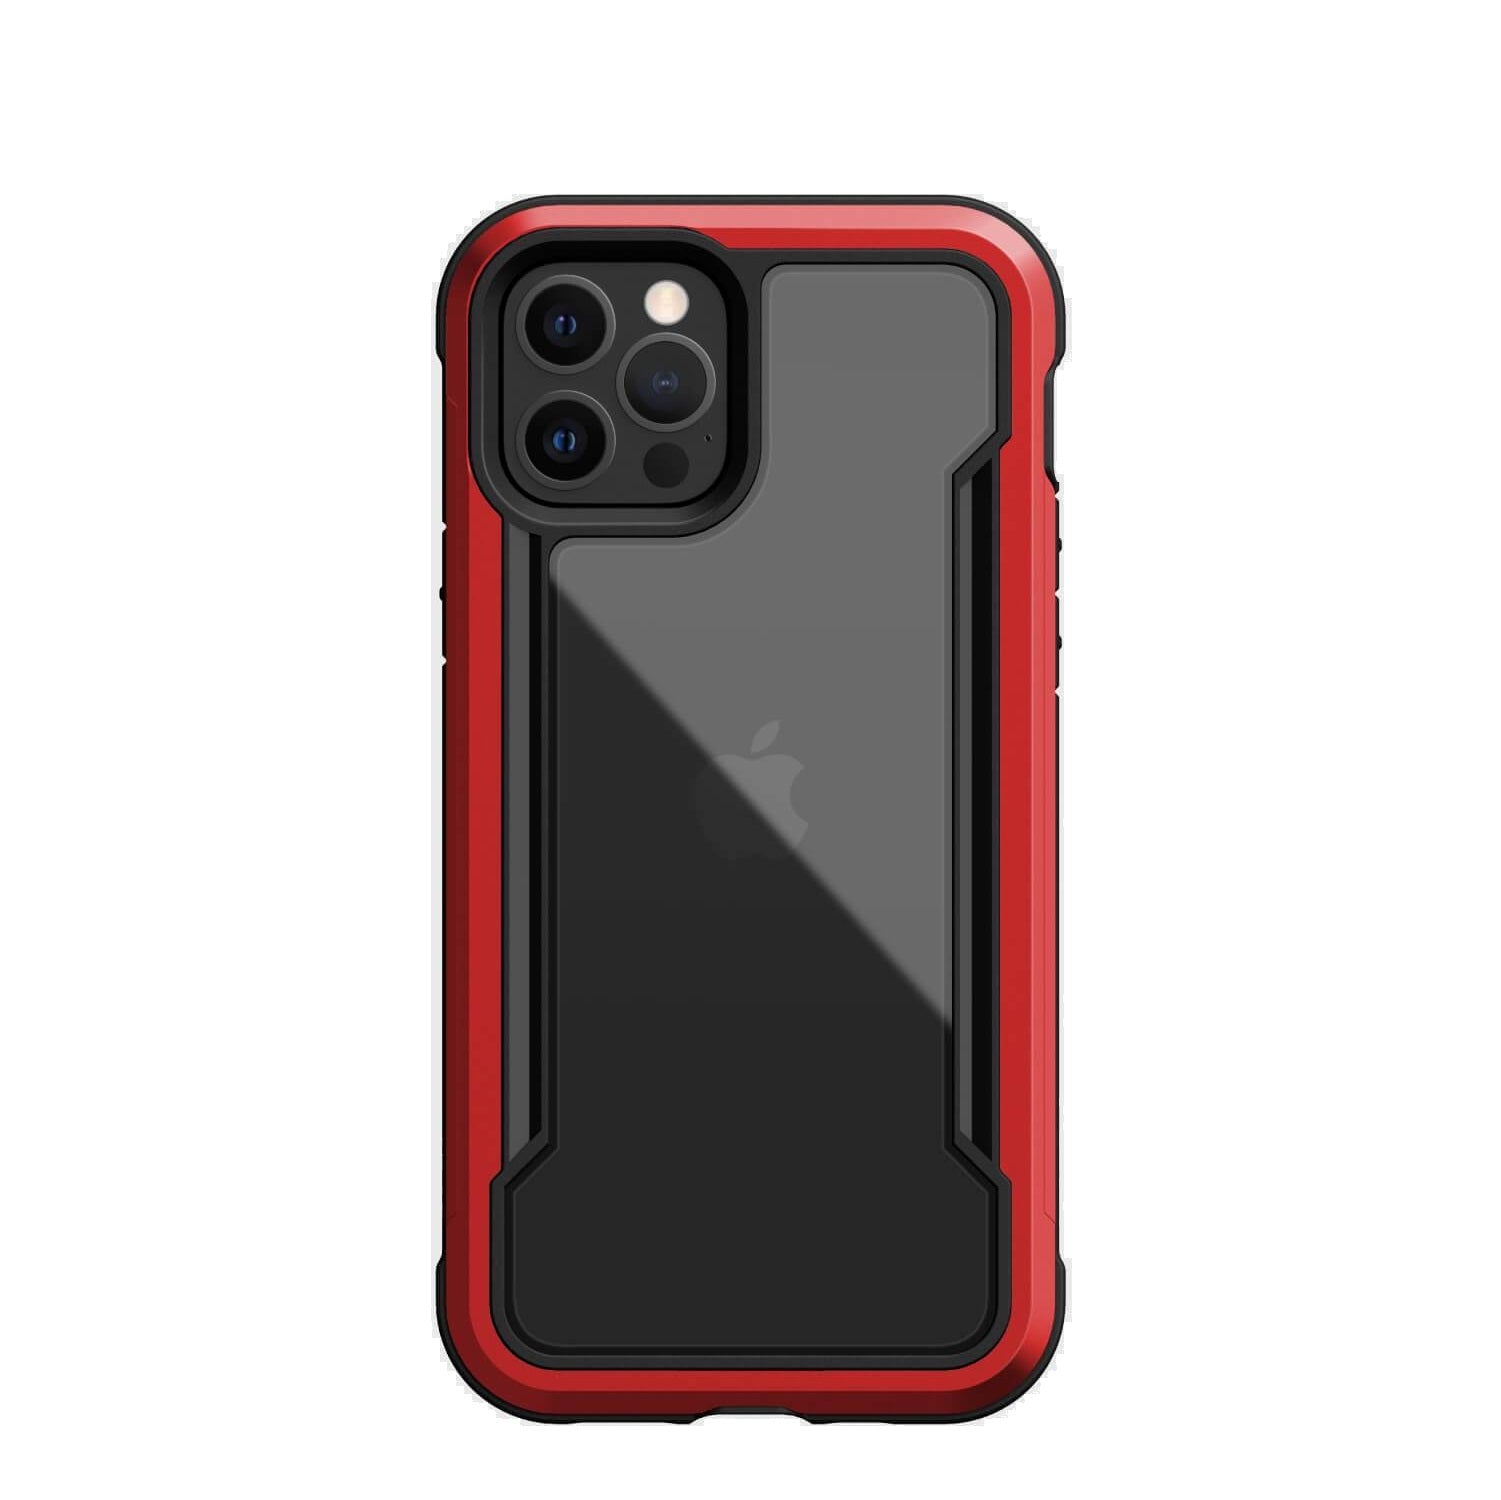 https://caserace.net/products/x-doria-defense-shield-back-cover-for-iphone-12-12-pro-6-1-red